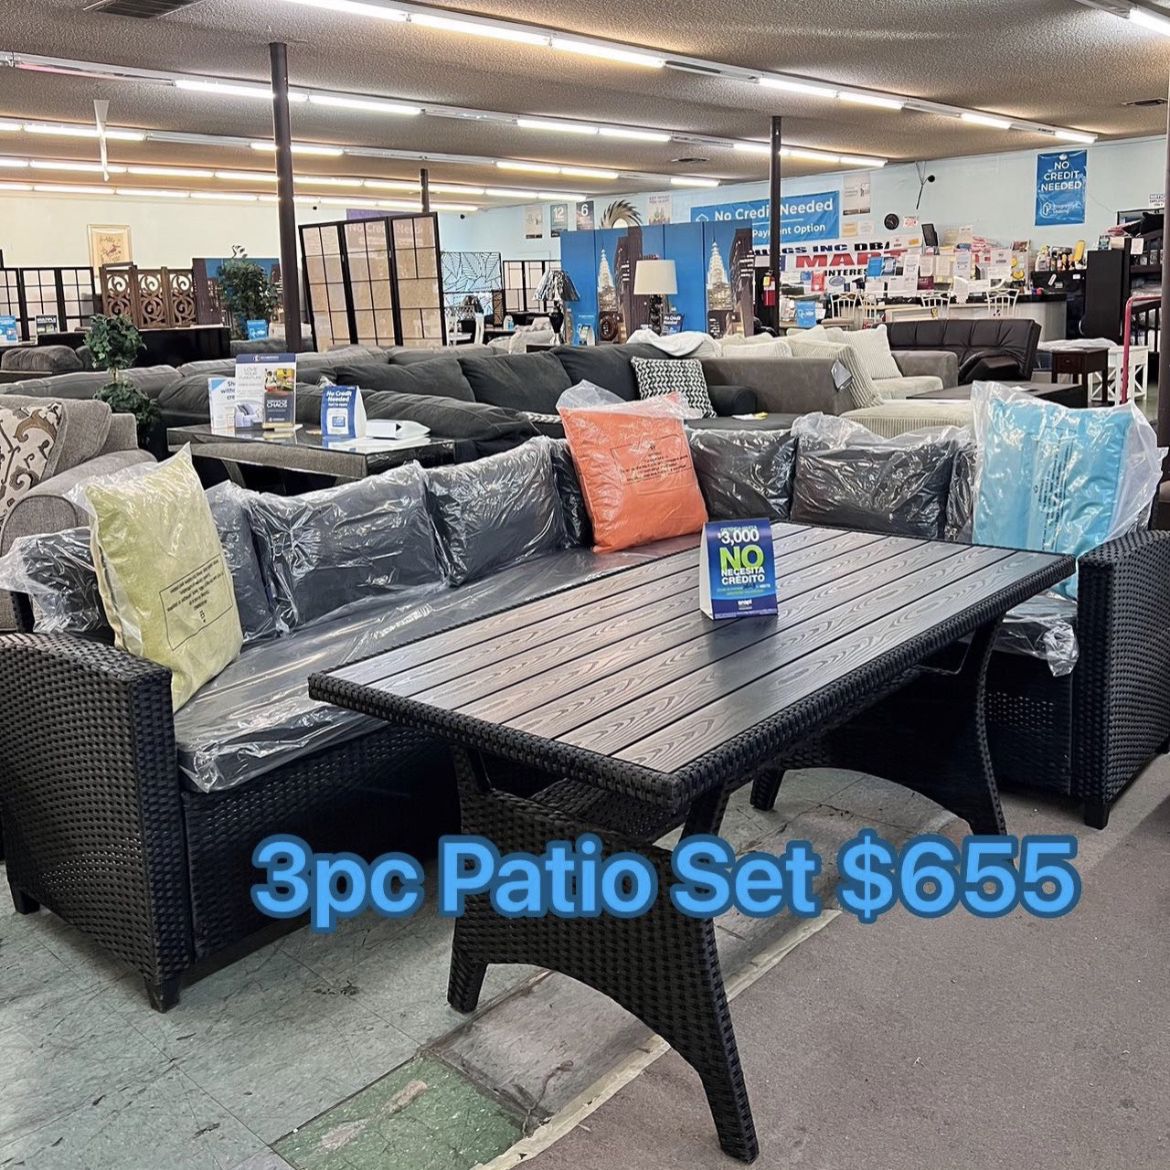 🔥Hot Deal🔥Brand New 3pc Patio Outdoor Sectional Clearance Special $655, Delivery Available 